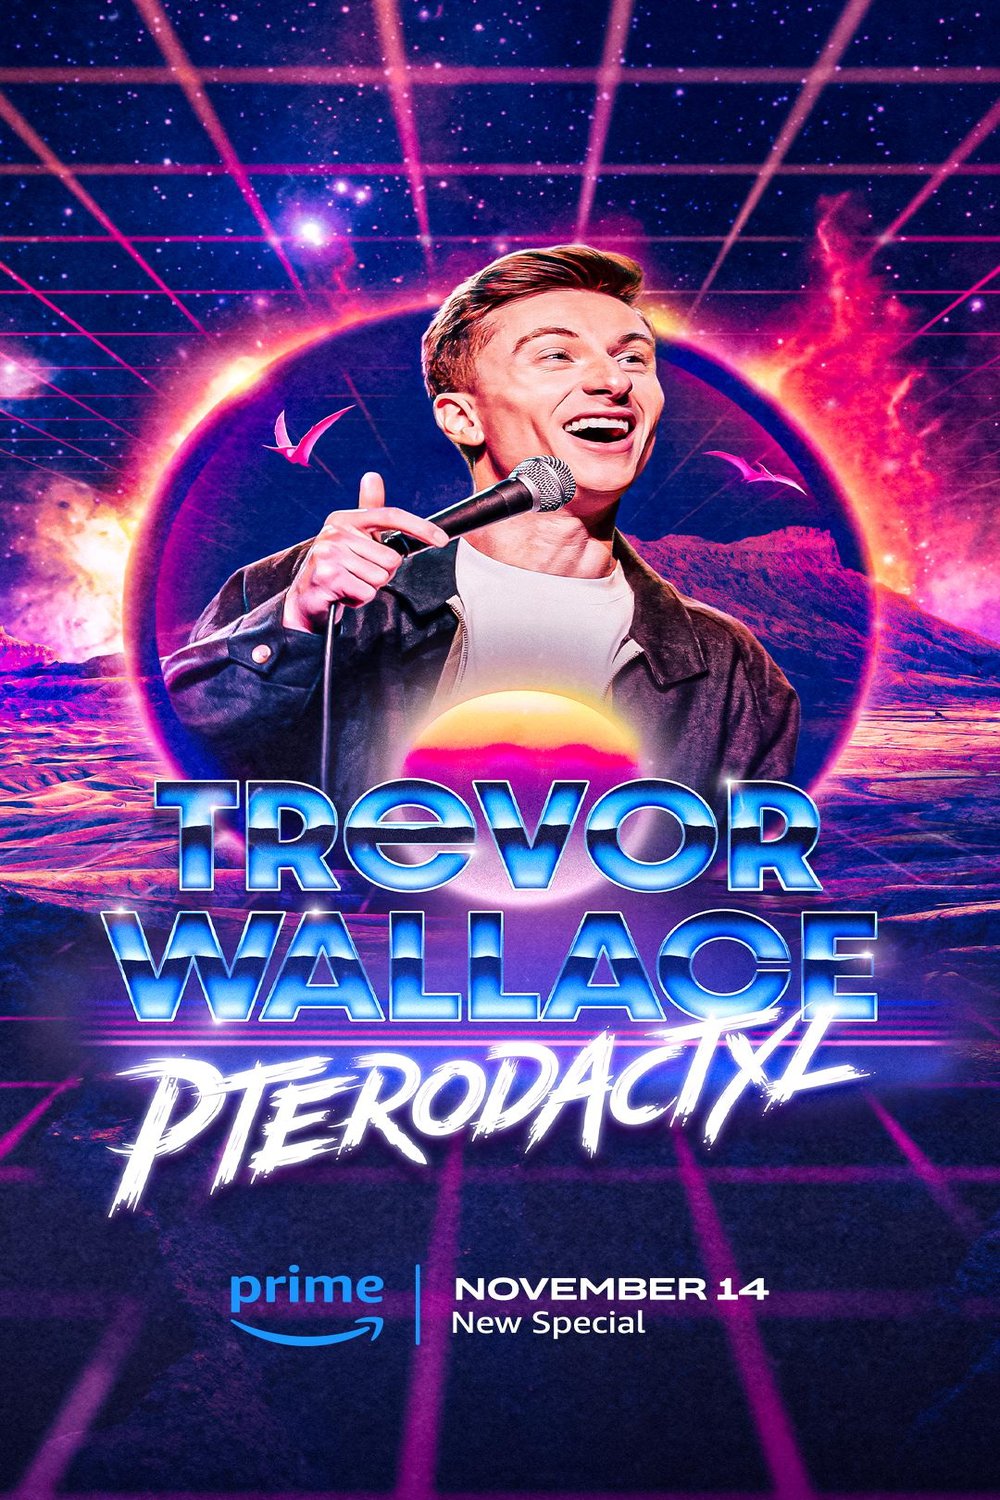 Poster of the movie Trevor Wallace: Pterodactyl